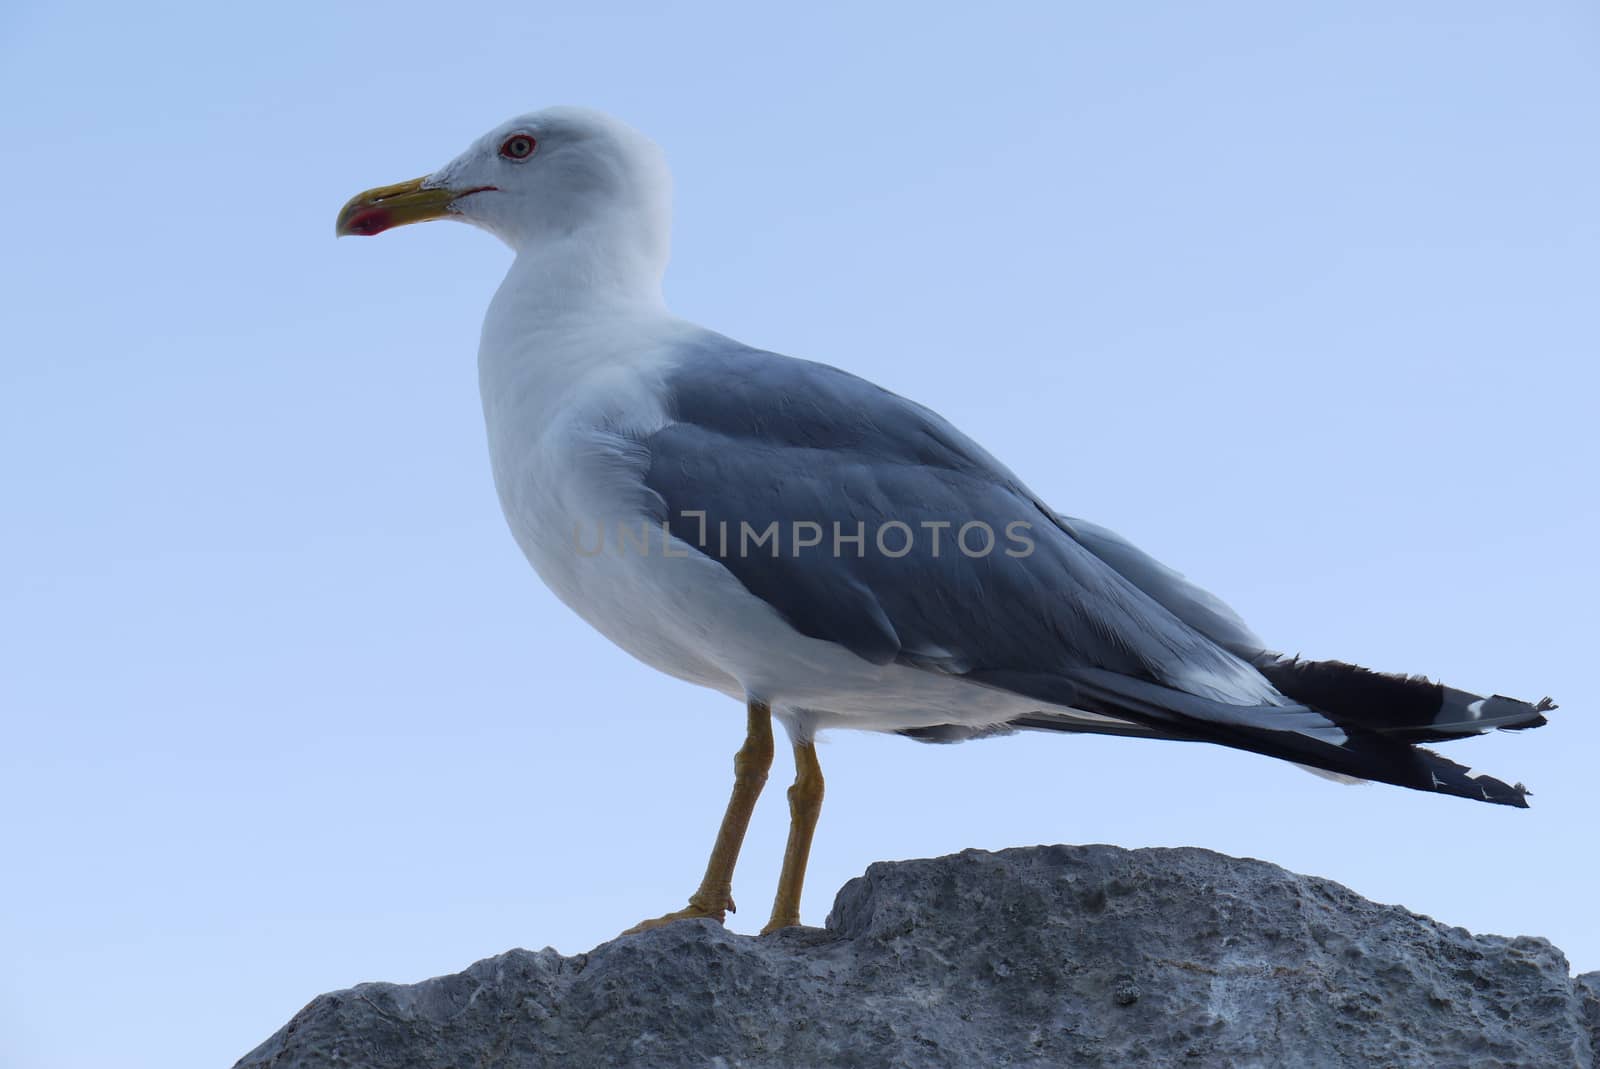 white gull with gray wings on top of a rock on the background of blue sky